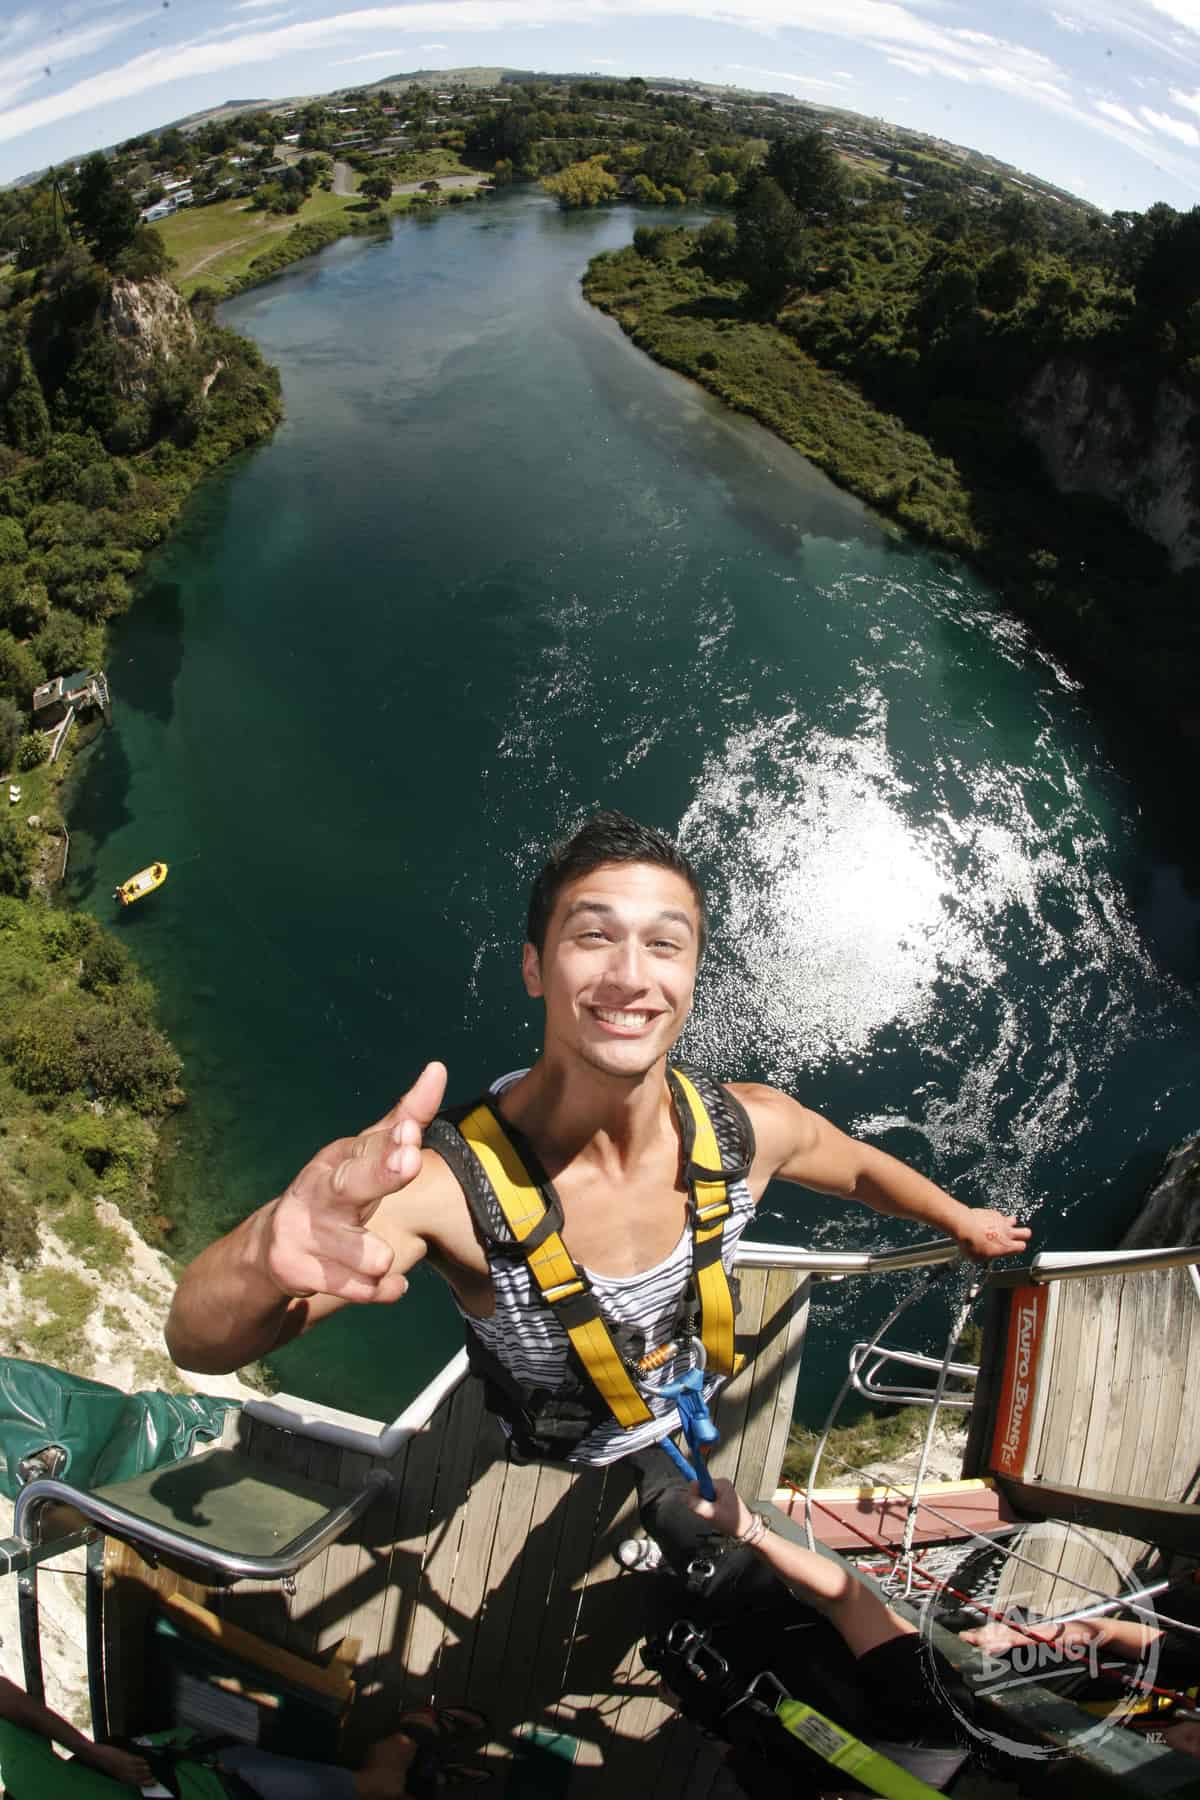 Take in the view at Taupo Bungy